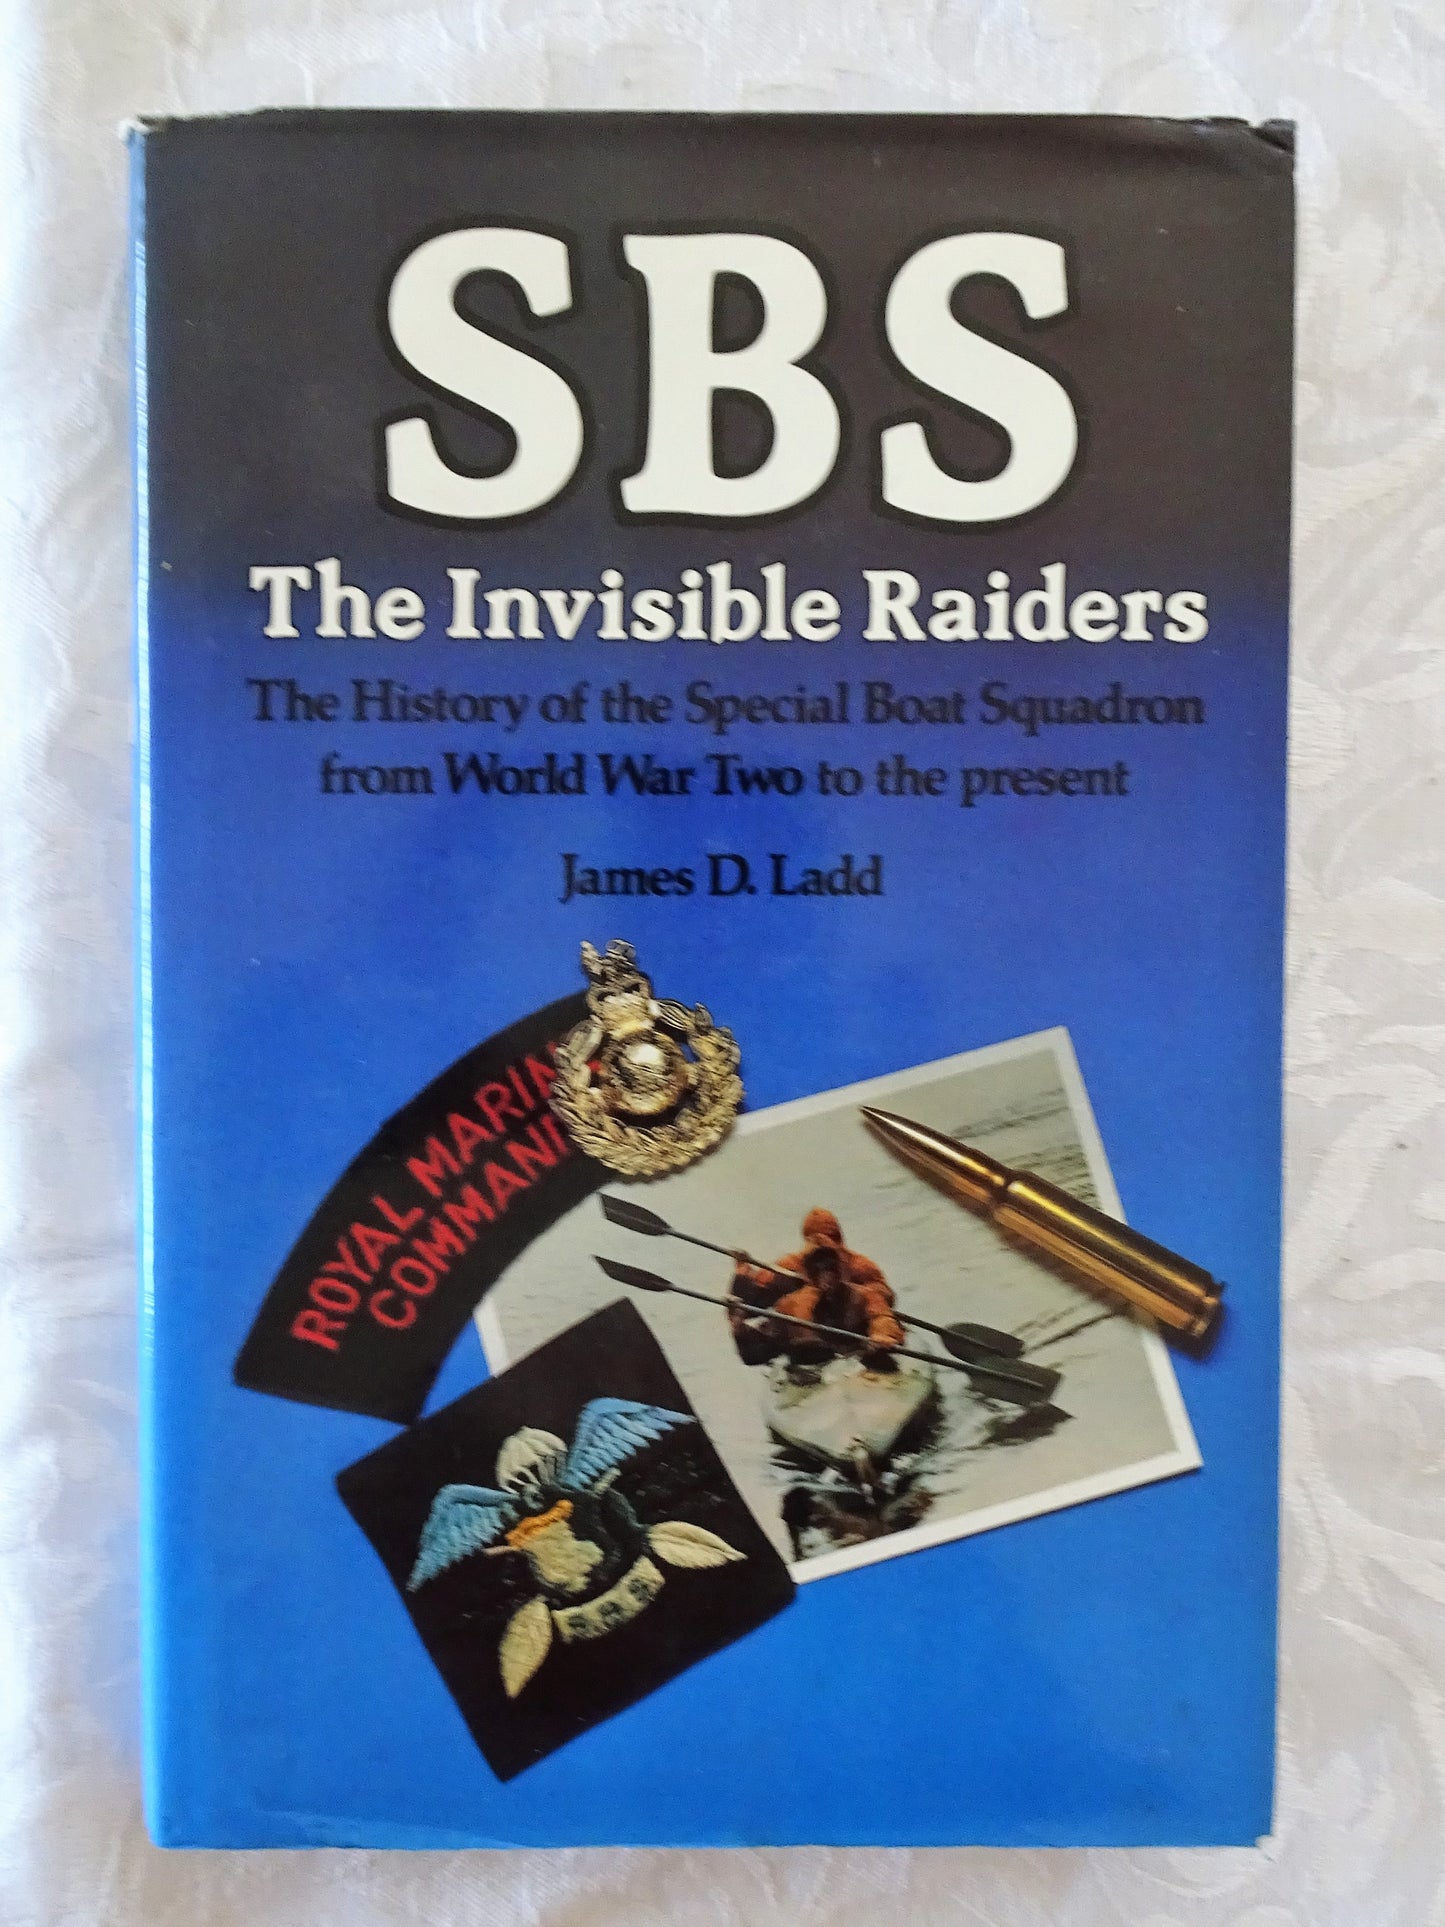 SBS The Invisible Raiders by James D. Ladd